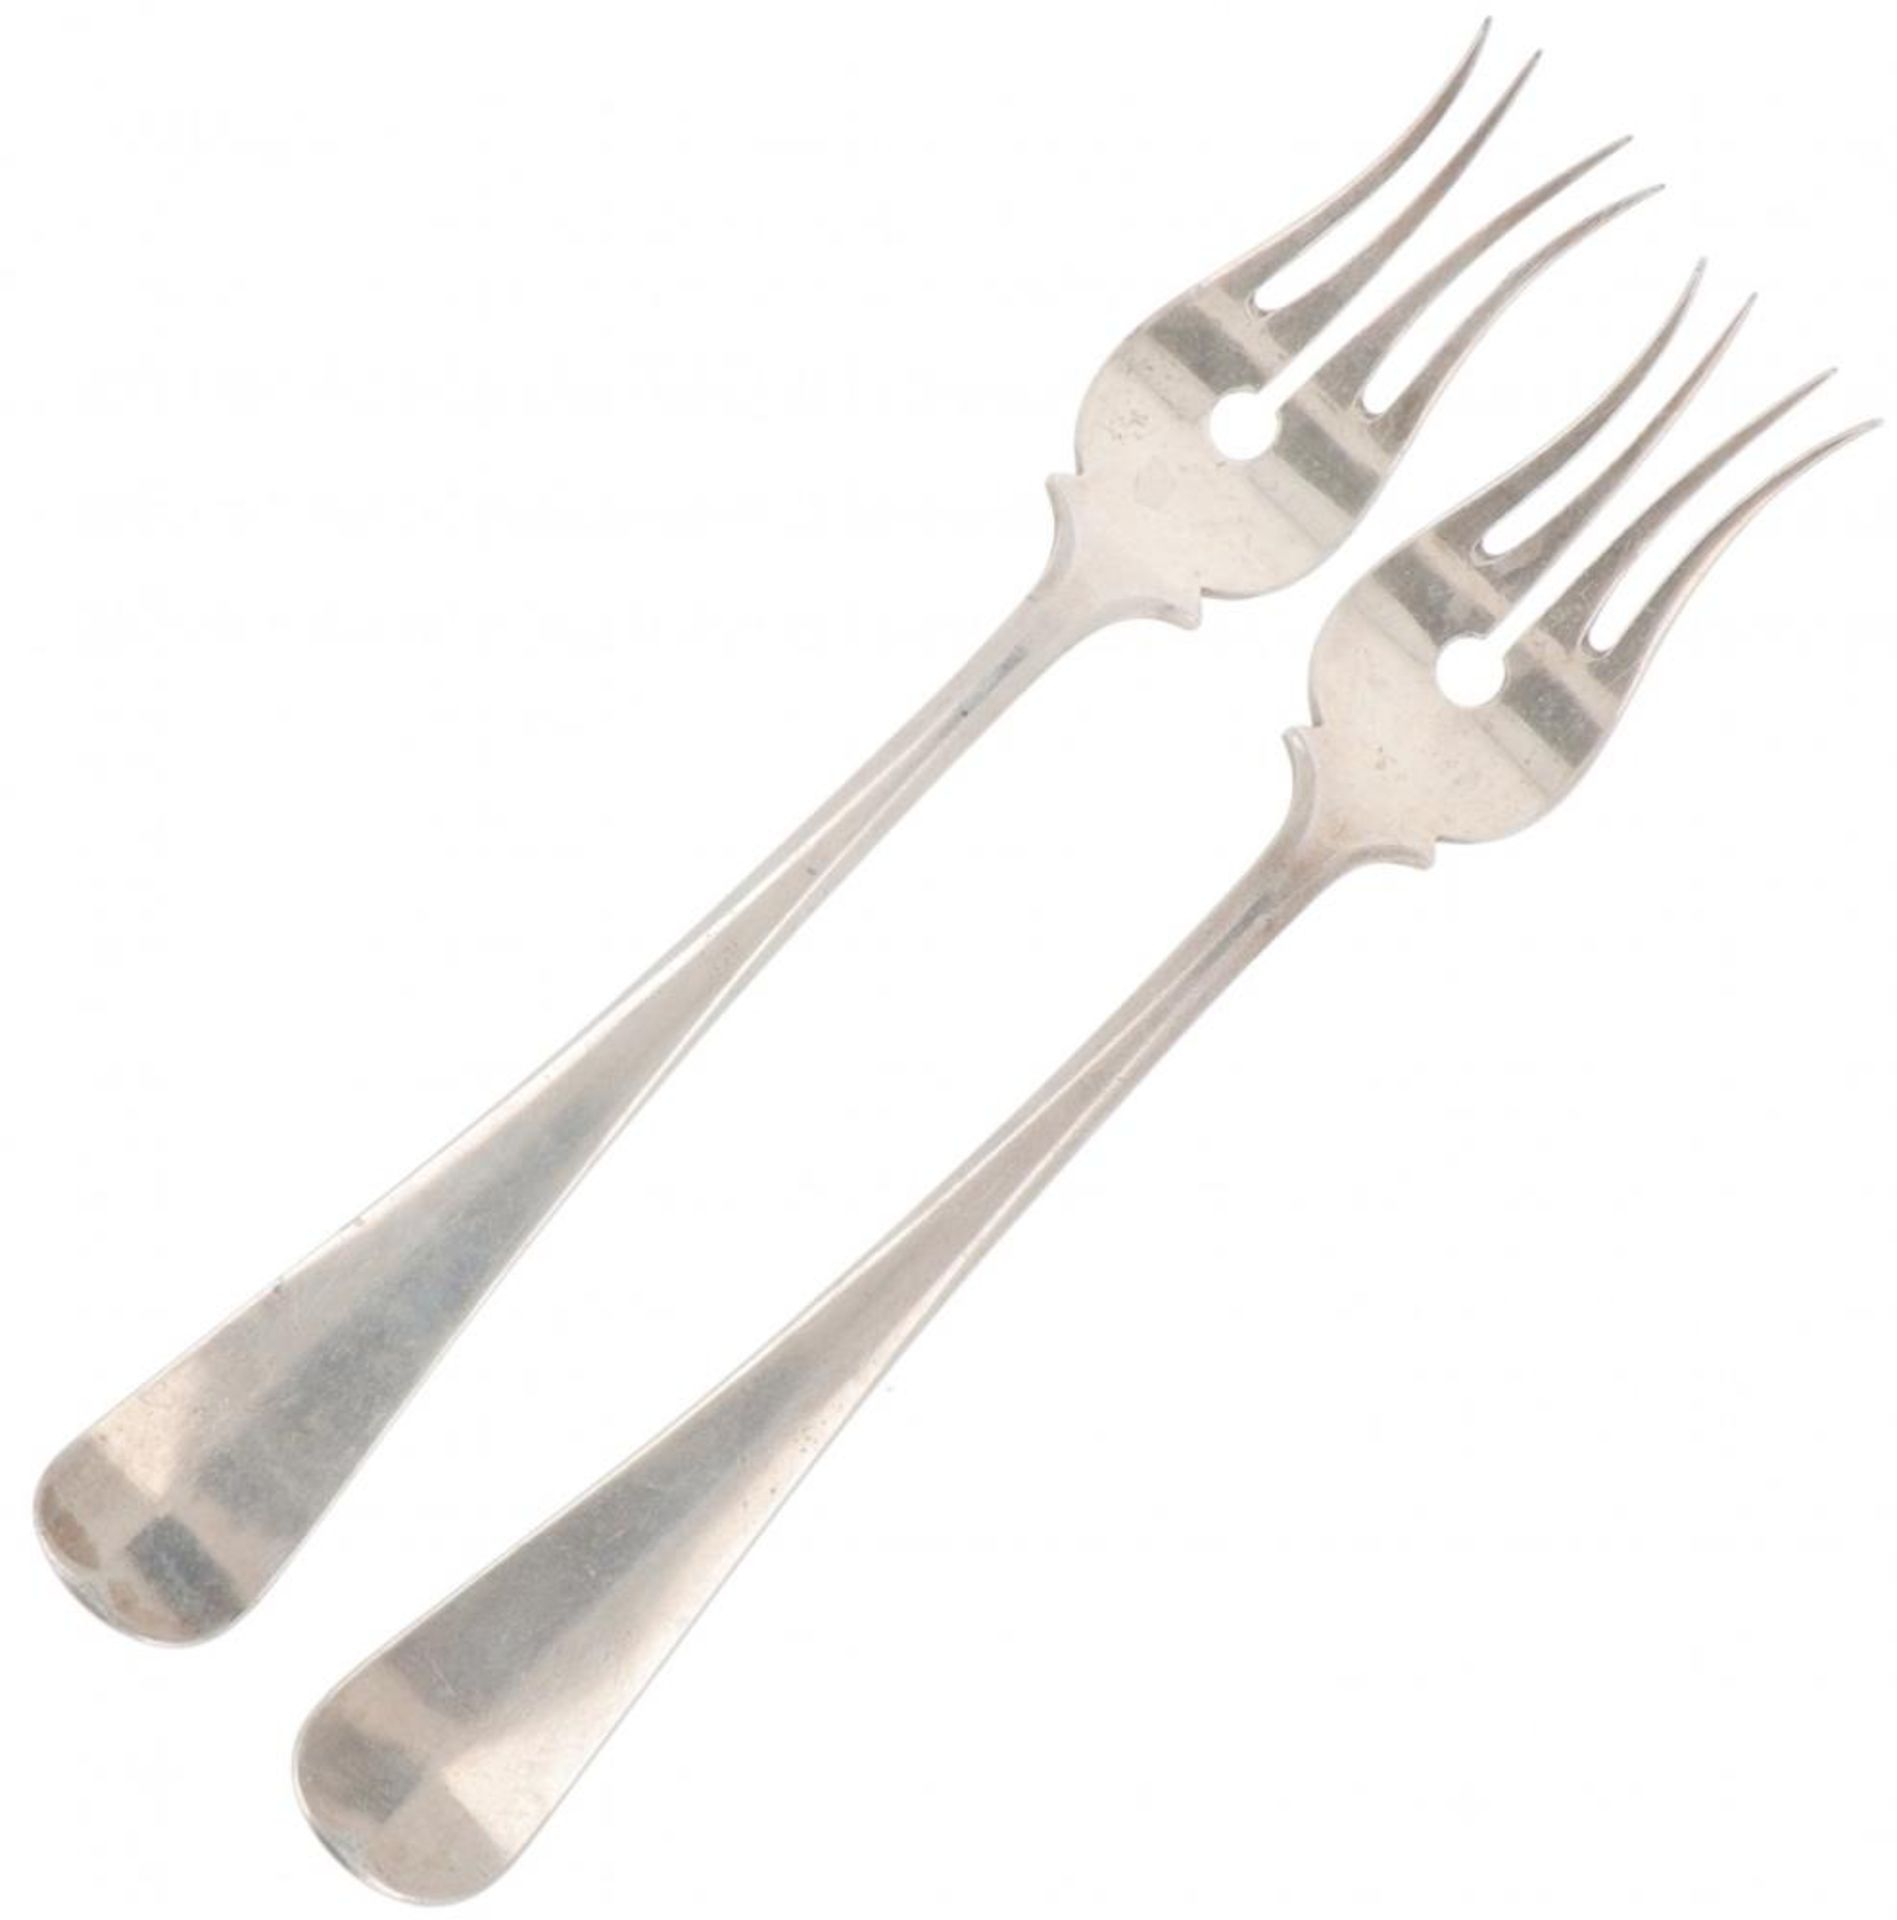 (2) piece set of cold meat forks "Haags Lofje" silver.